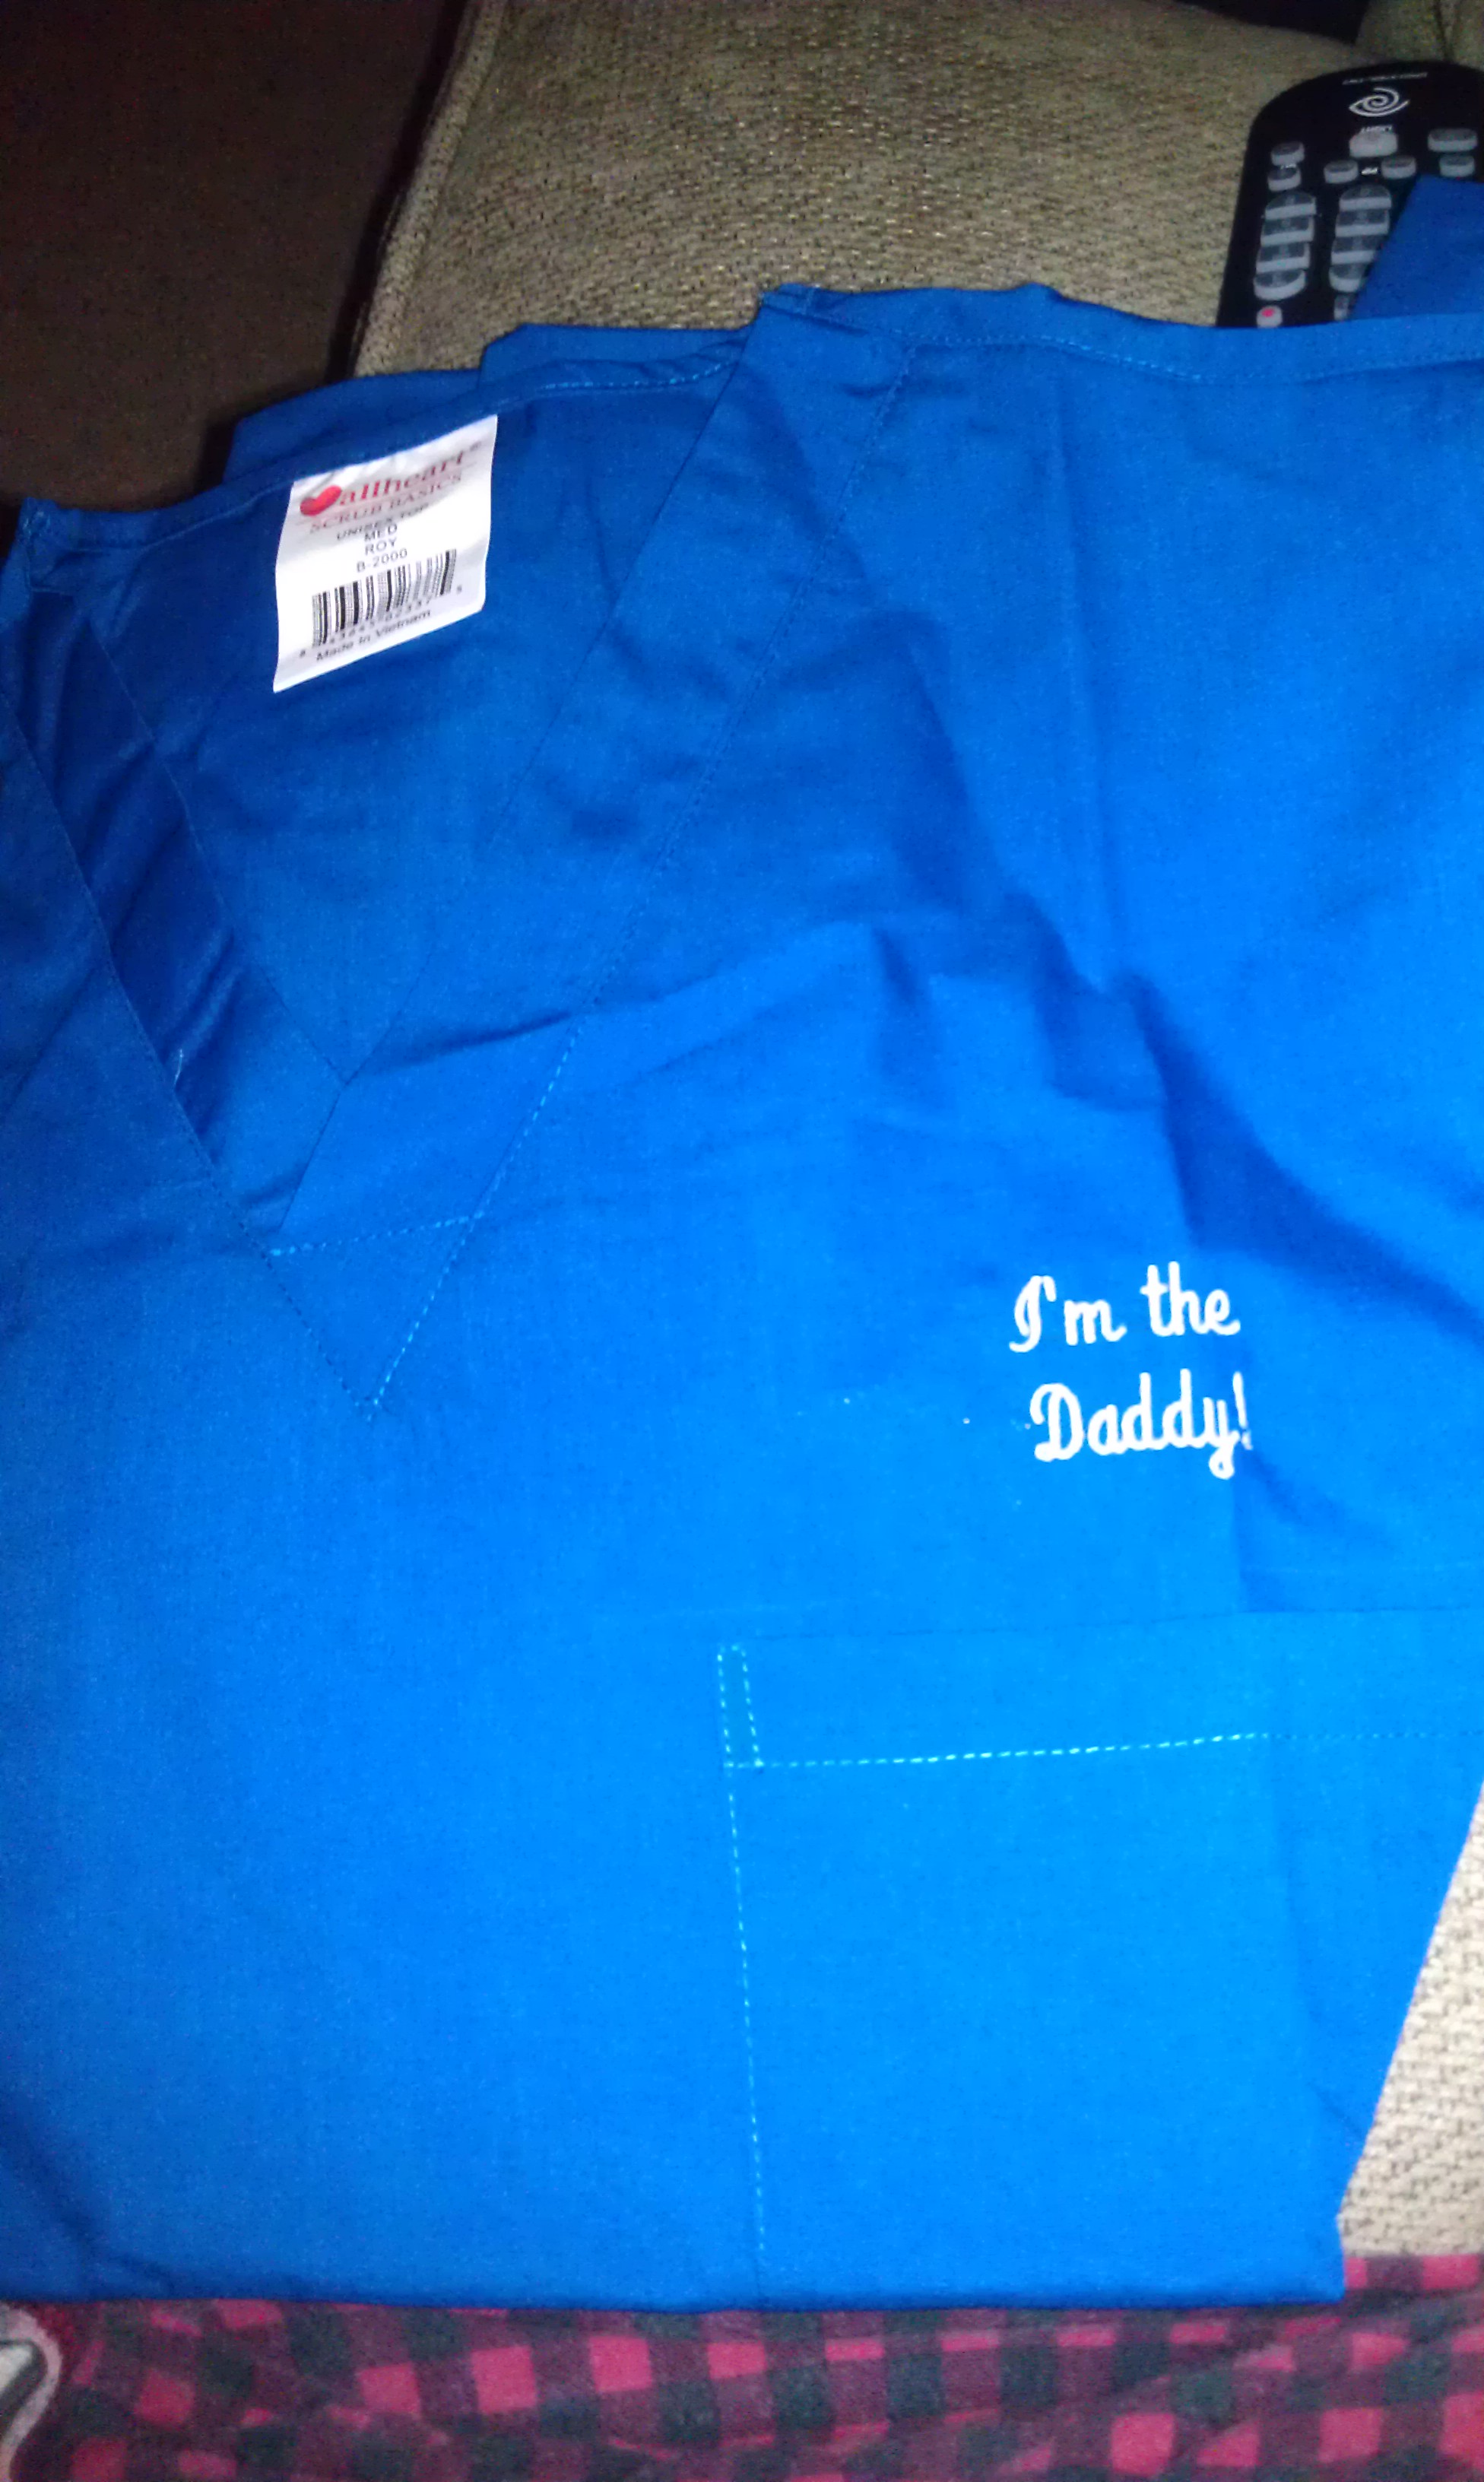 I'm the Daddy! smock